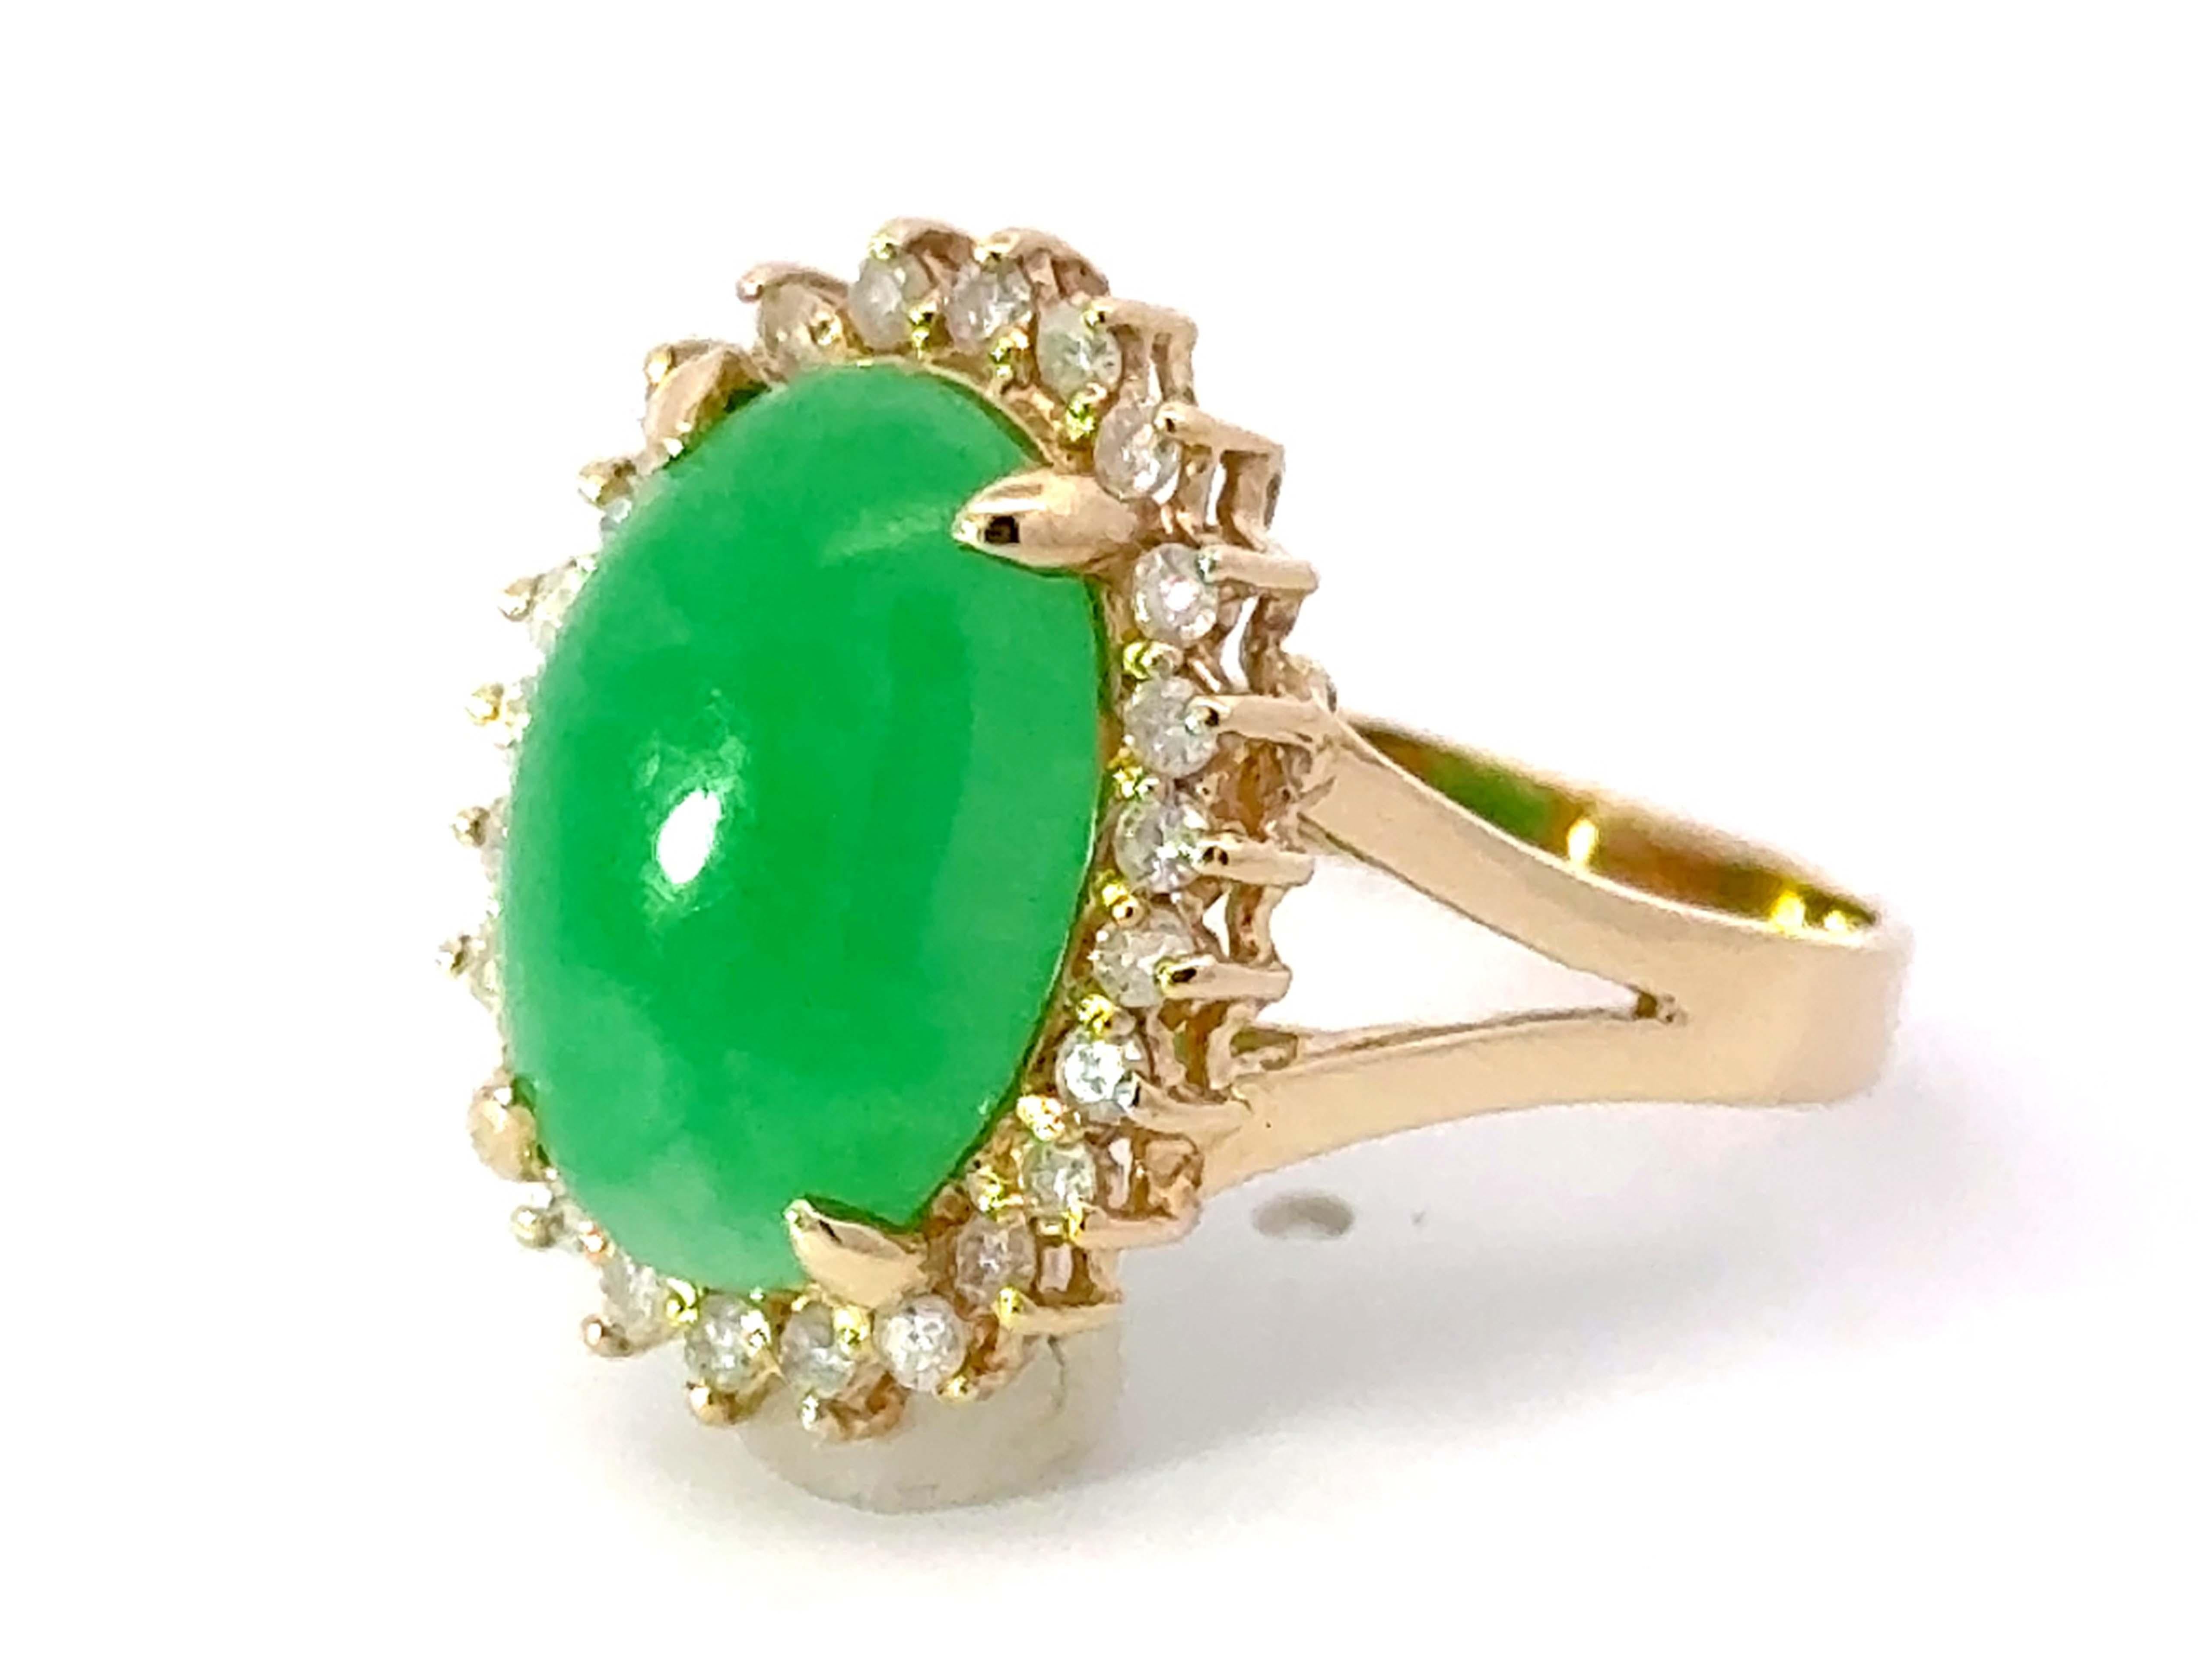 Green Jade Cabochon Diamond Halo Ring 14k Yellow Gold In Excellent Condition For Sale In Honolulu, HI